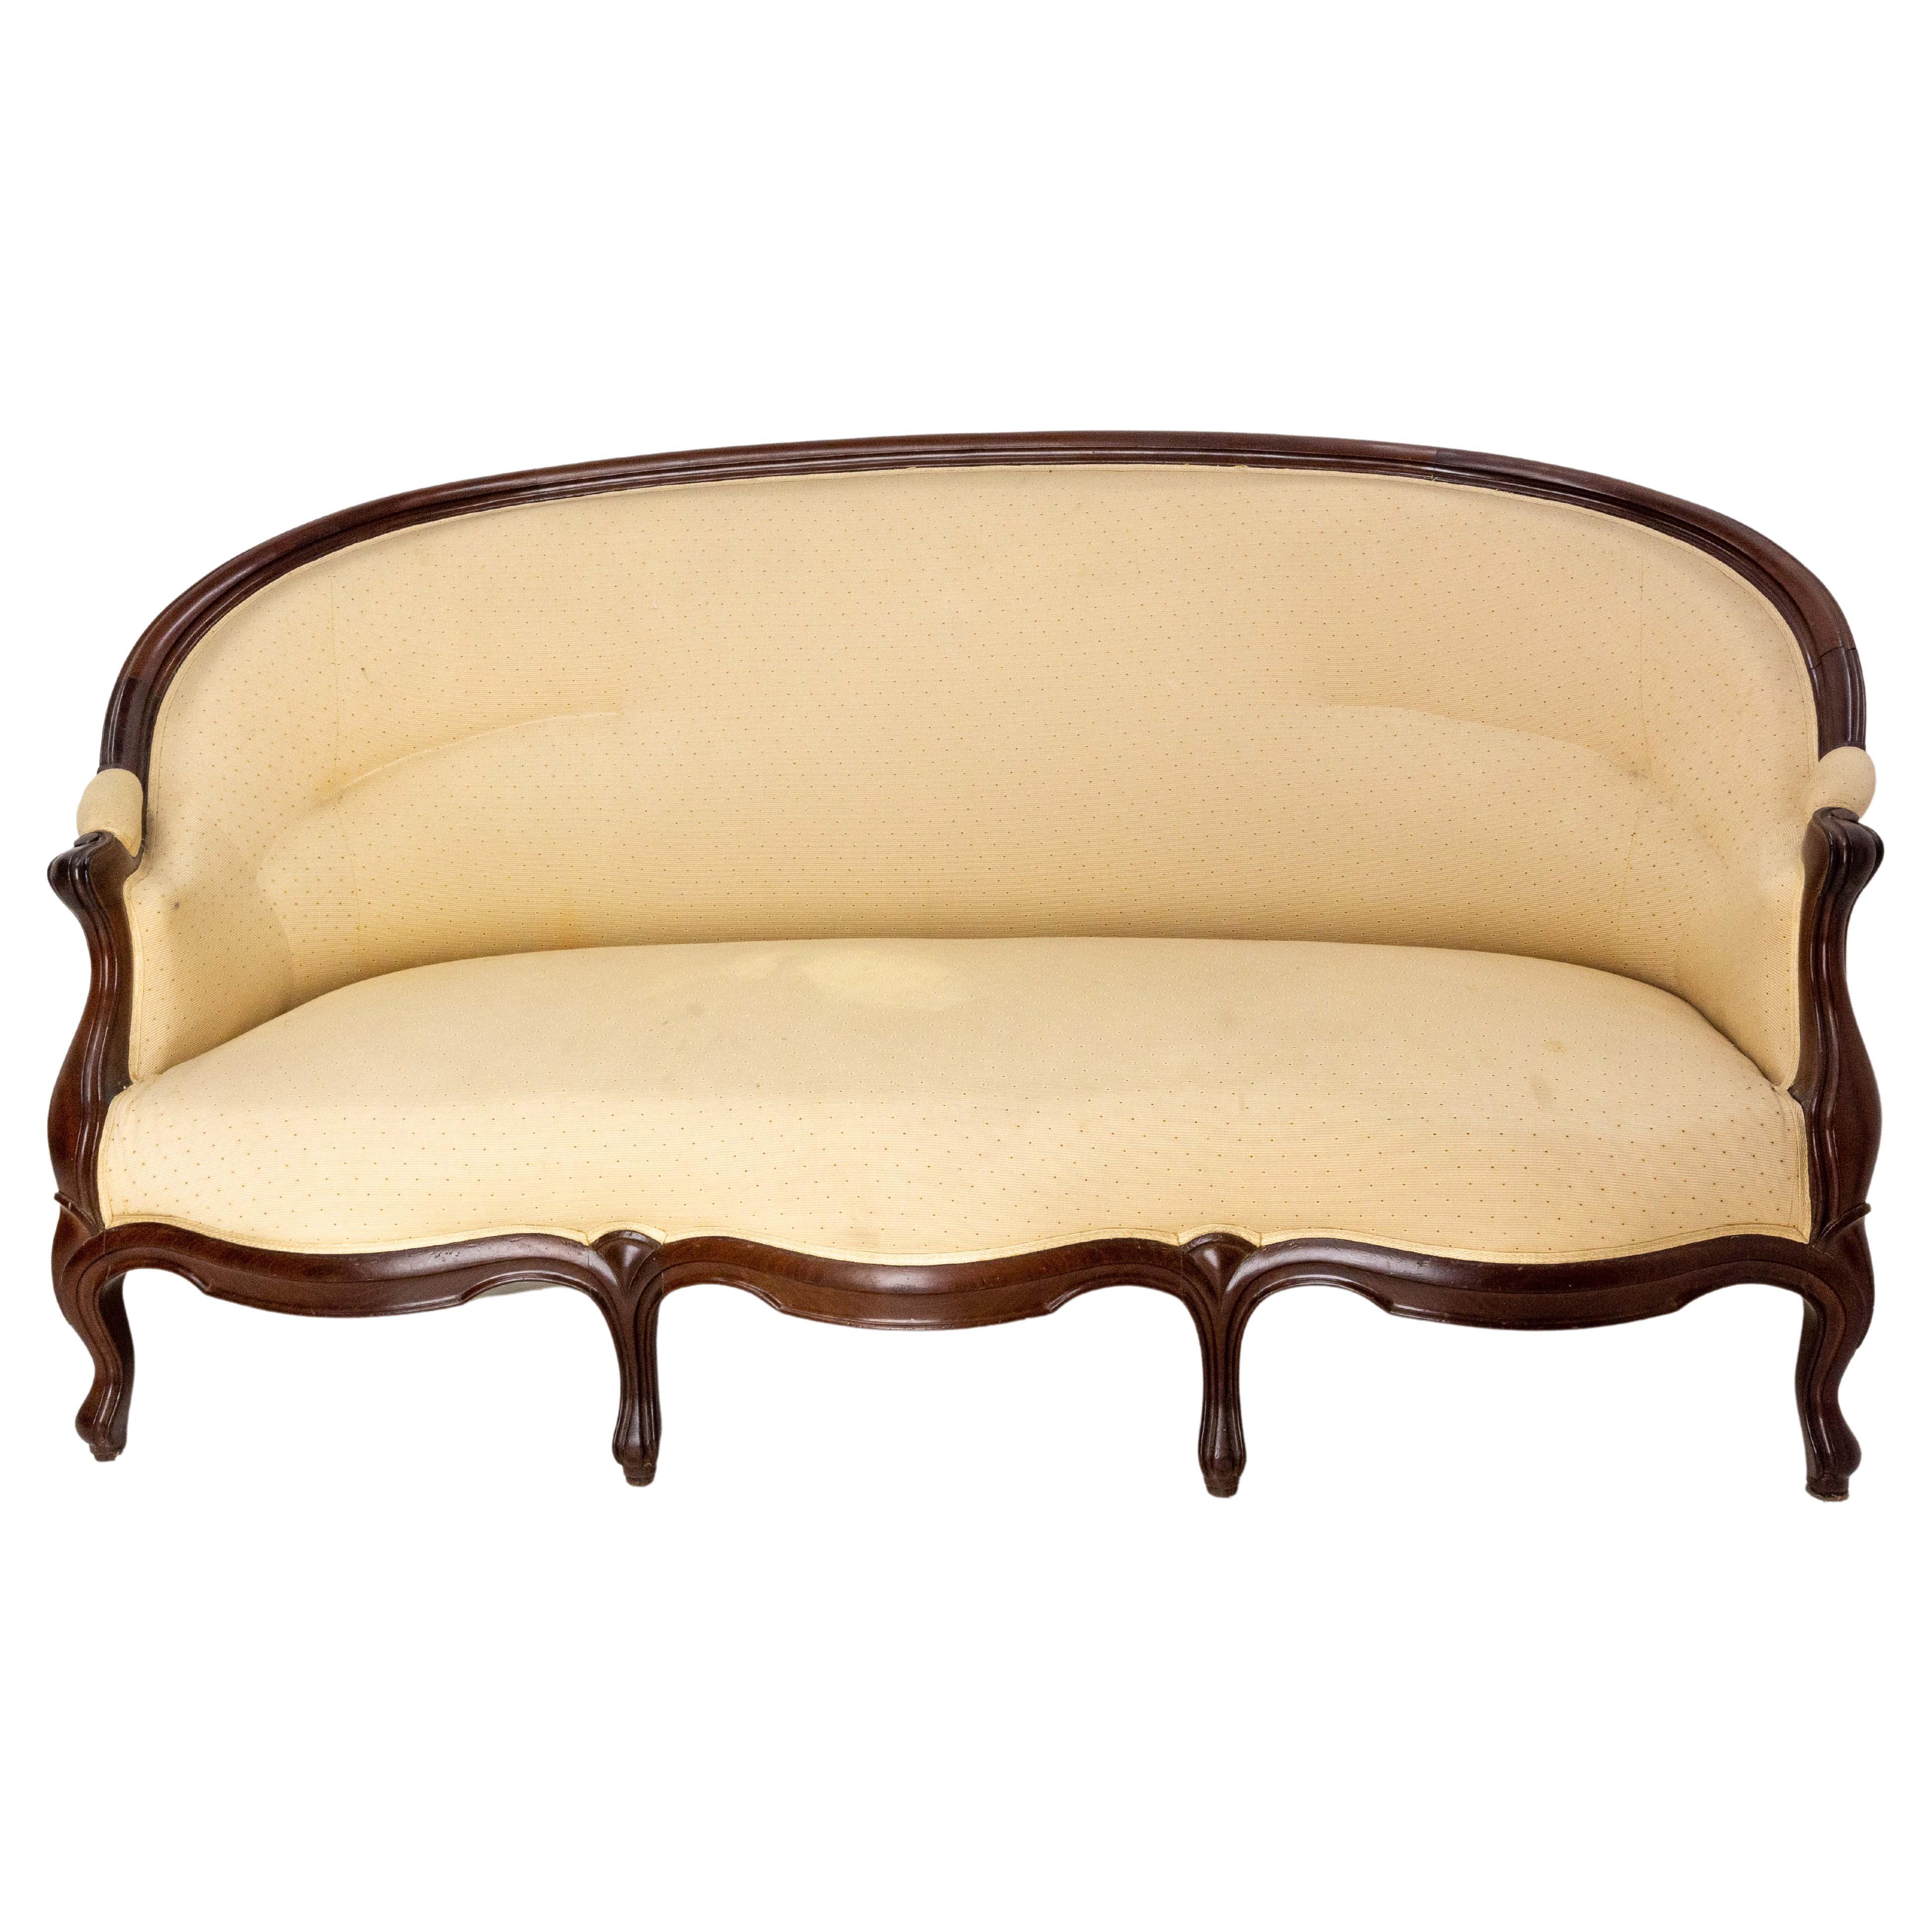 Napoleon Banquette - 2 For Sale on 1stDibs